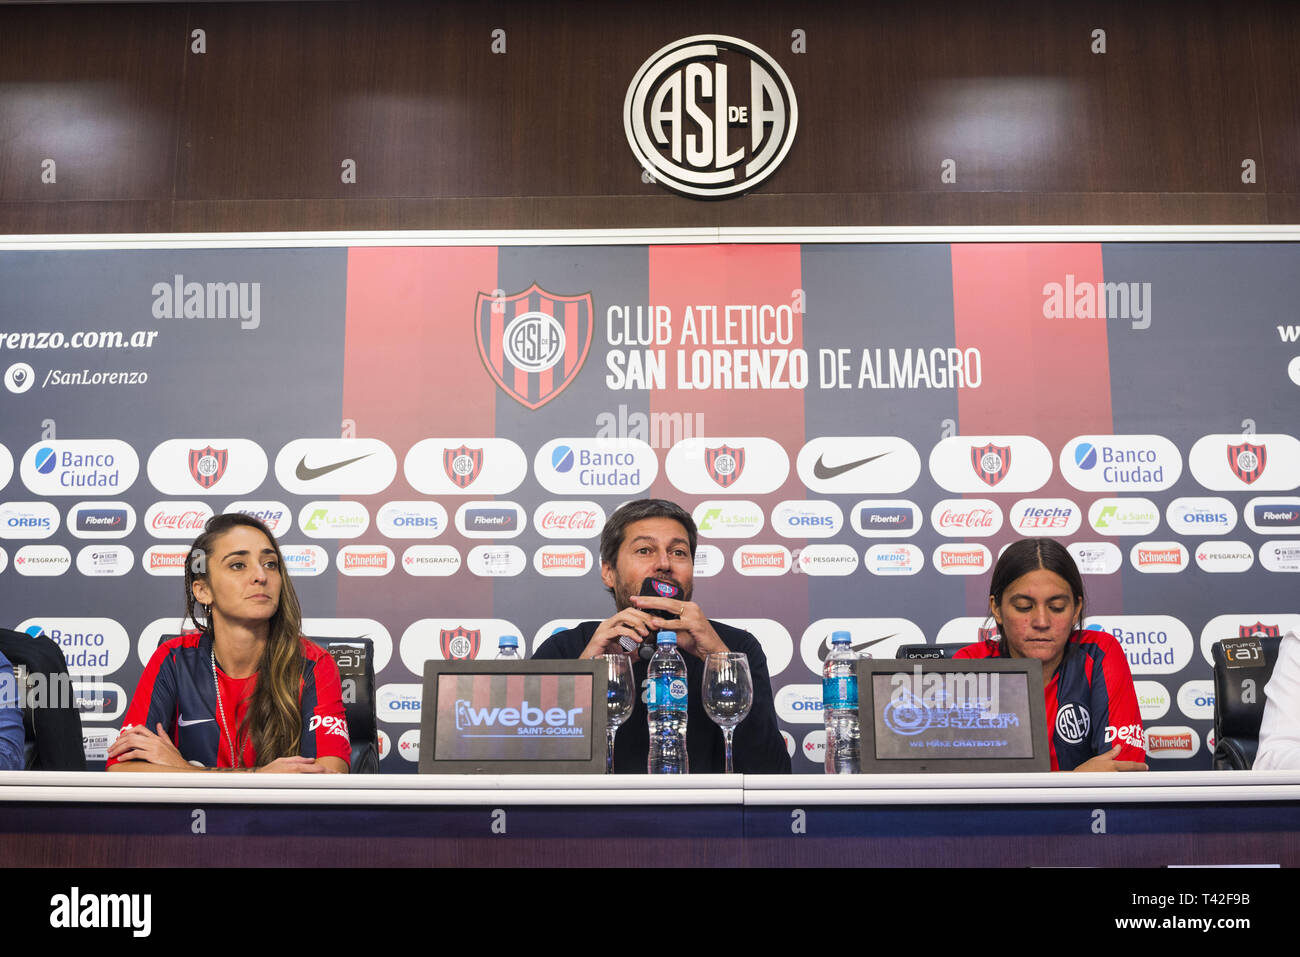 April 12, 2019 - City Of Buenos Aires, City of Buenos Aires, Argentina - SPORTS WorldNews. 2019 April 12, City of Buenos Aires, Argentina. Athletic Club San Lorenzo de Almagro Female football team sign on 2019 April 12th the first professional female football contract in Argentina on first category, after the Argentinian Football Association (AFA in Spanish) agreed on 2019 March 18 to professionalized female football.MACARENA SANCHEZ, one of the football players who fight the lasts months for Professional Female Football (left), MATIAS LAMMENS, President of Athletic Club San Lorenzo (Center), Stock Photo